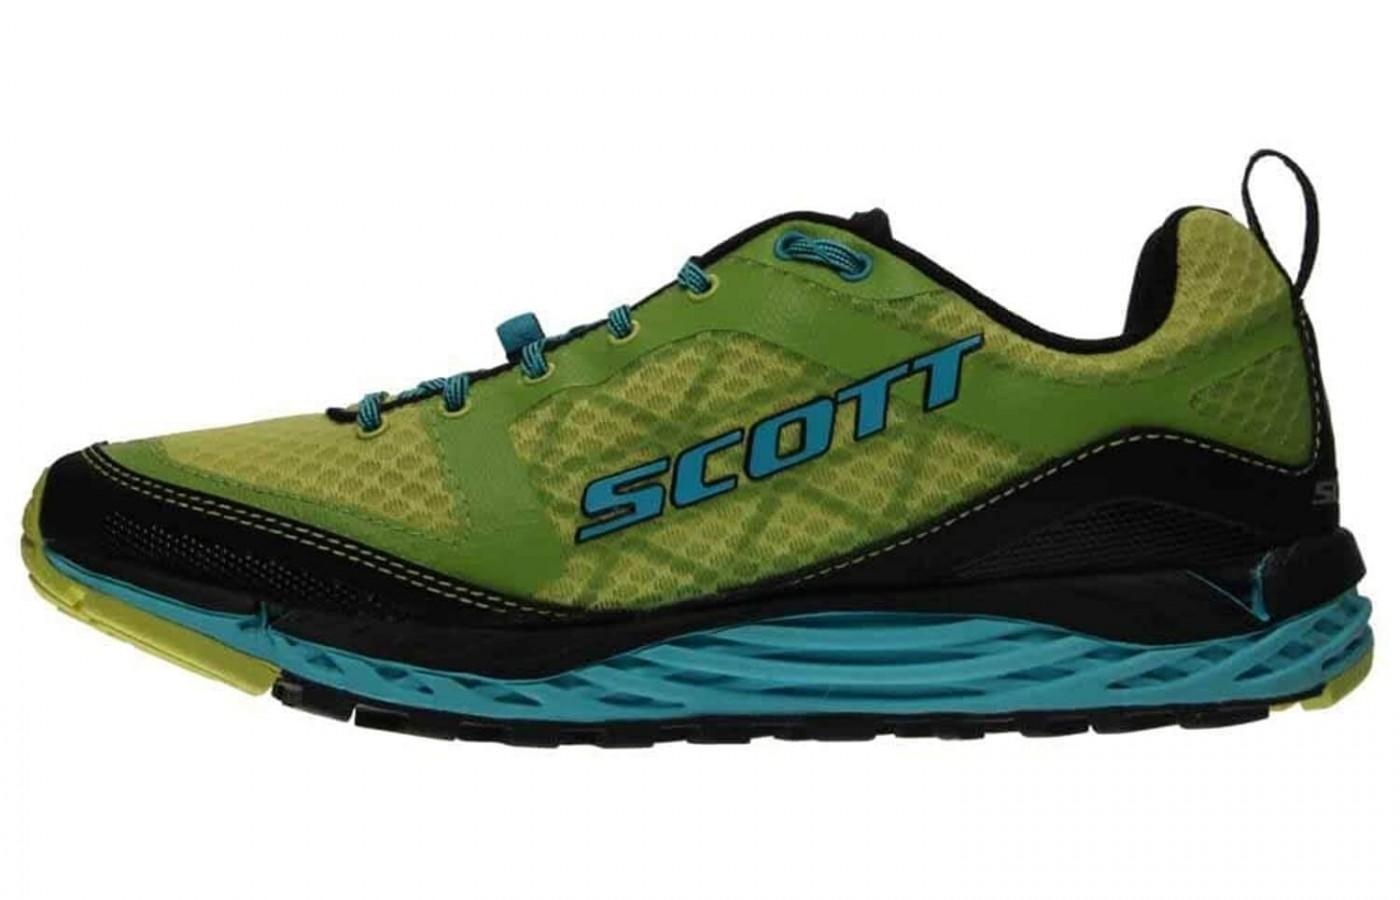 The eRide midsole promotes a natural movement in the gait cycle. 